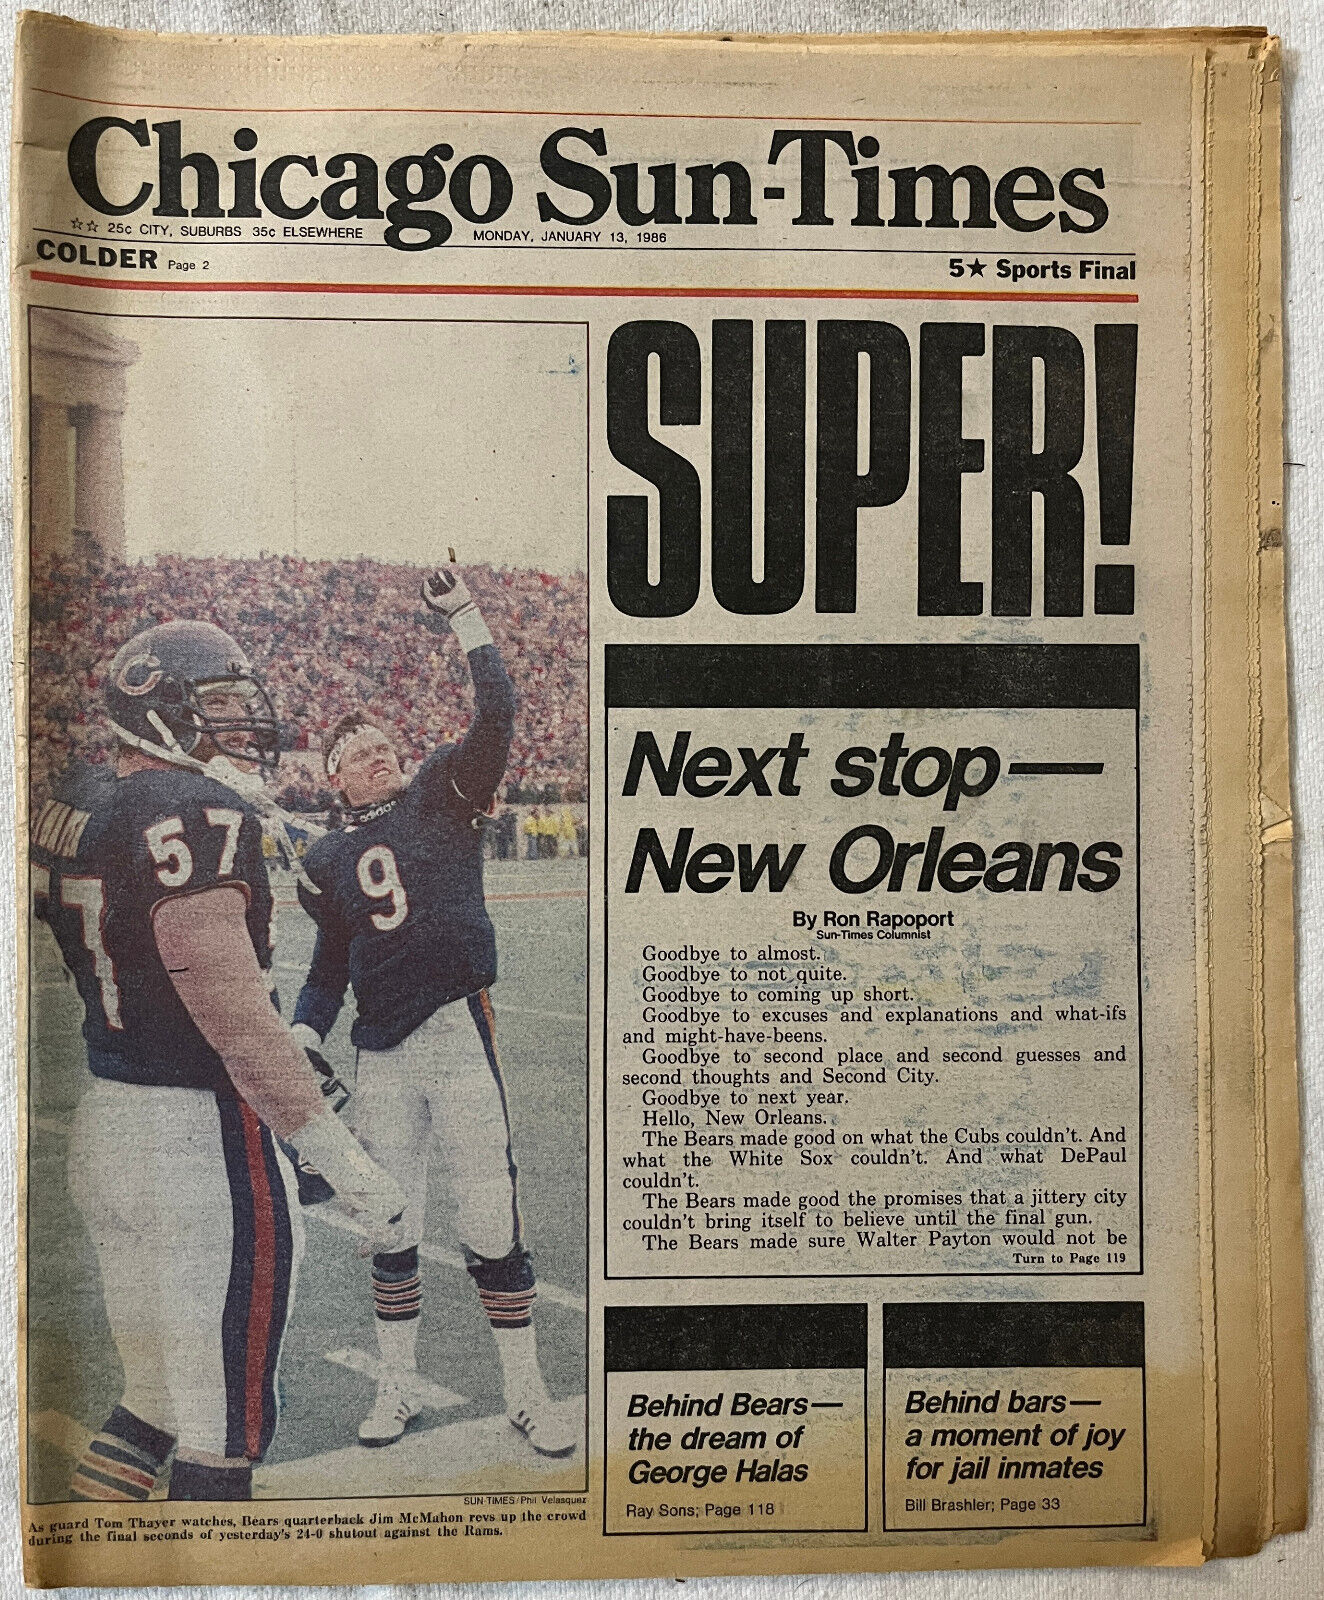 Chicago Sun-Times, Sports Final, Monday, January 13, 1986, Pages 1-22, 99-120